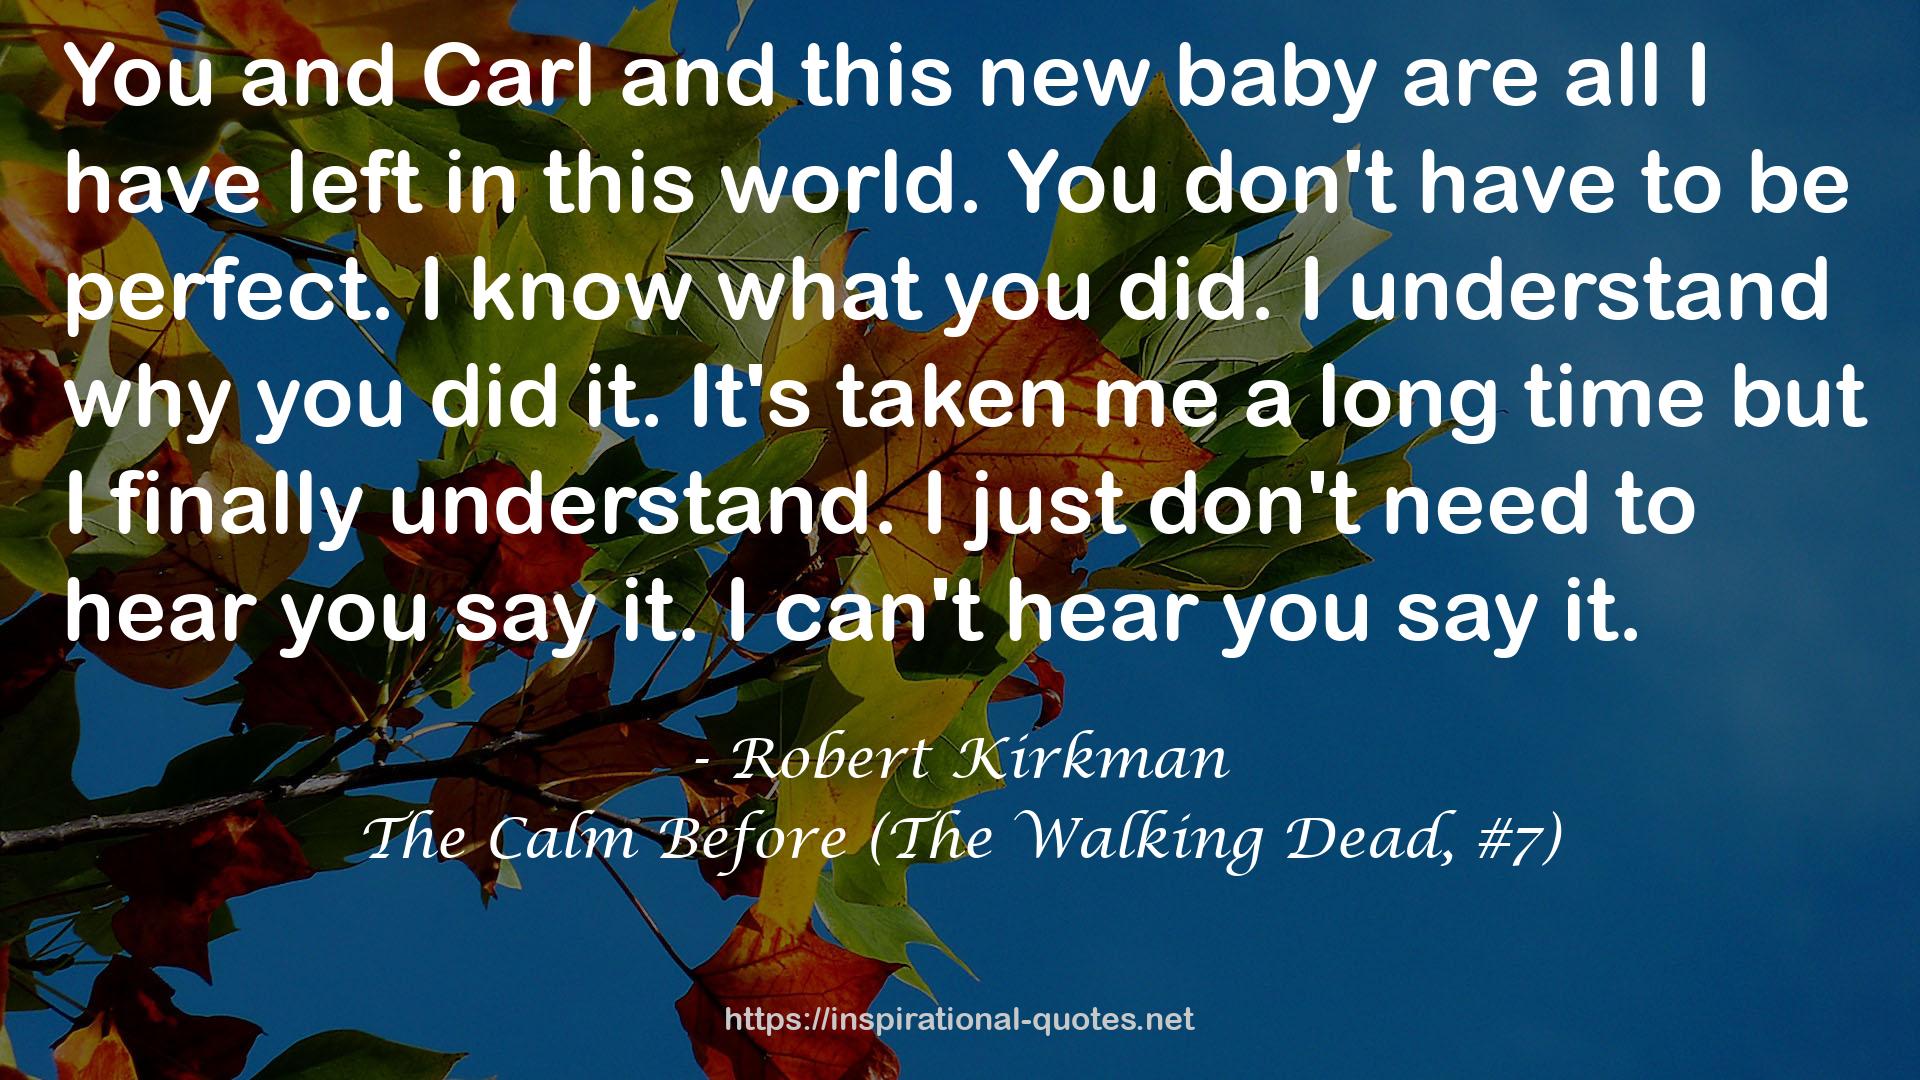 The Calm Before (The Walking Dead, #7) QUOTES